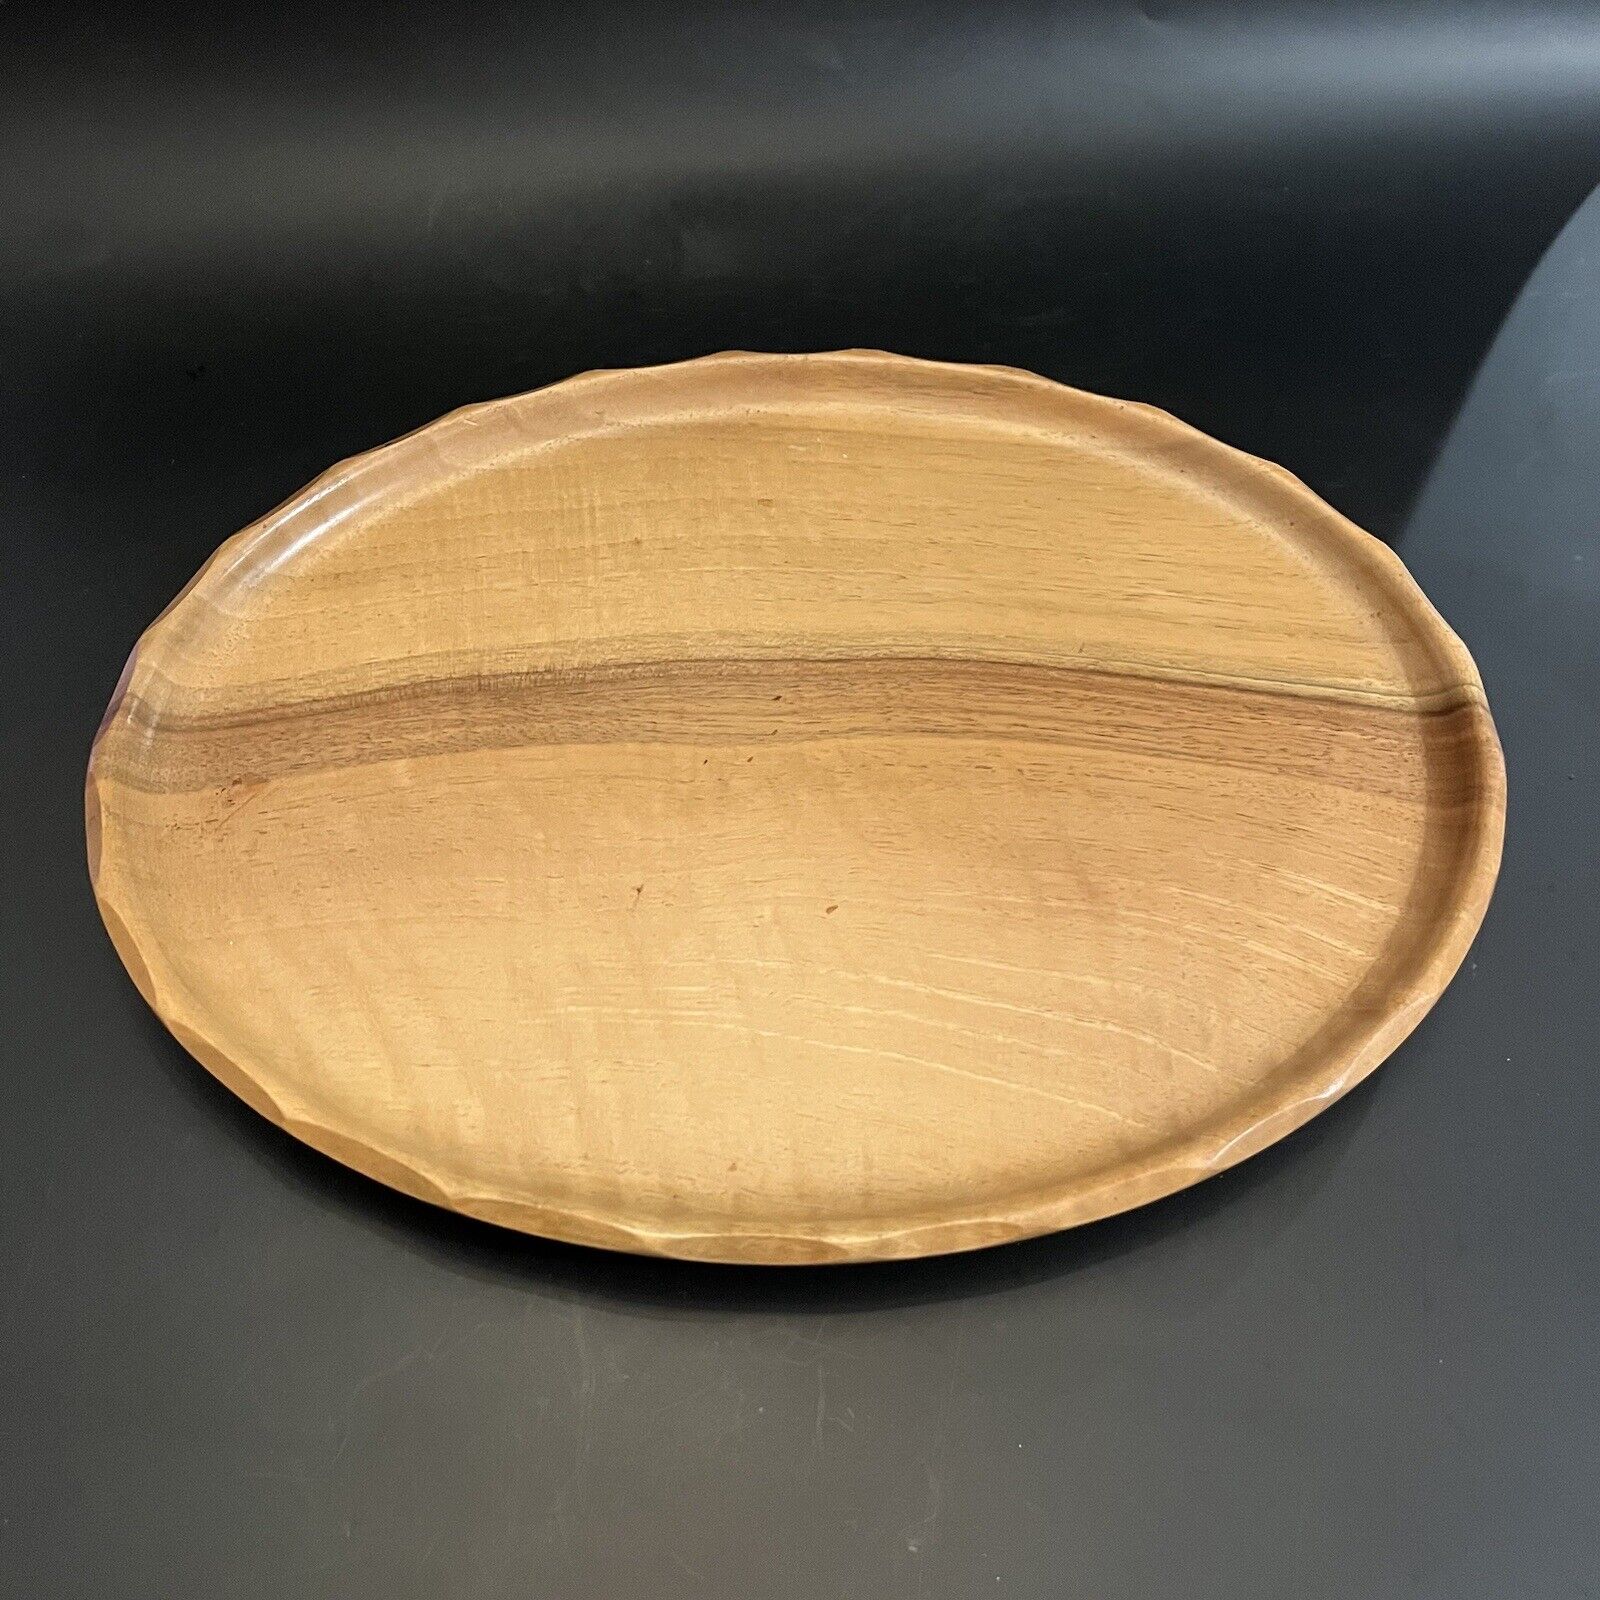 Gorgeous Solid Wood Tray With Decorative Edge, Light Grained Wood